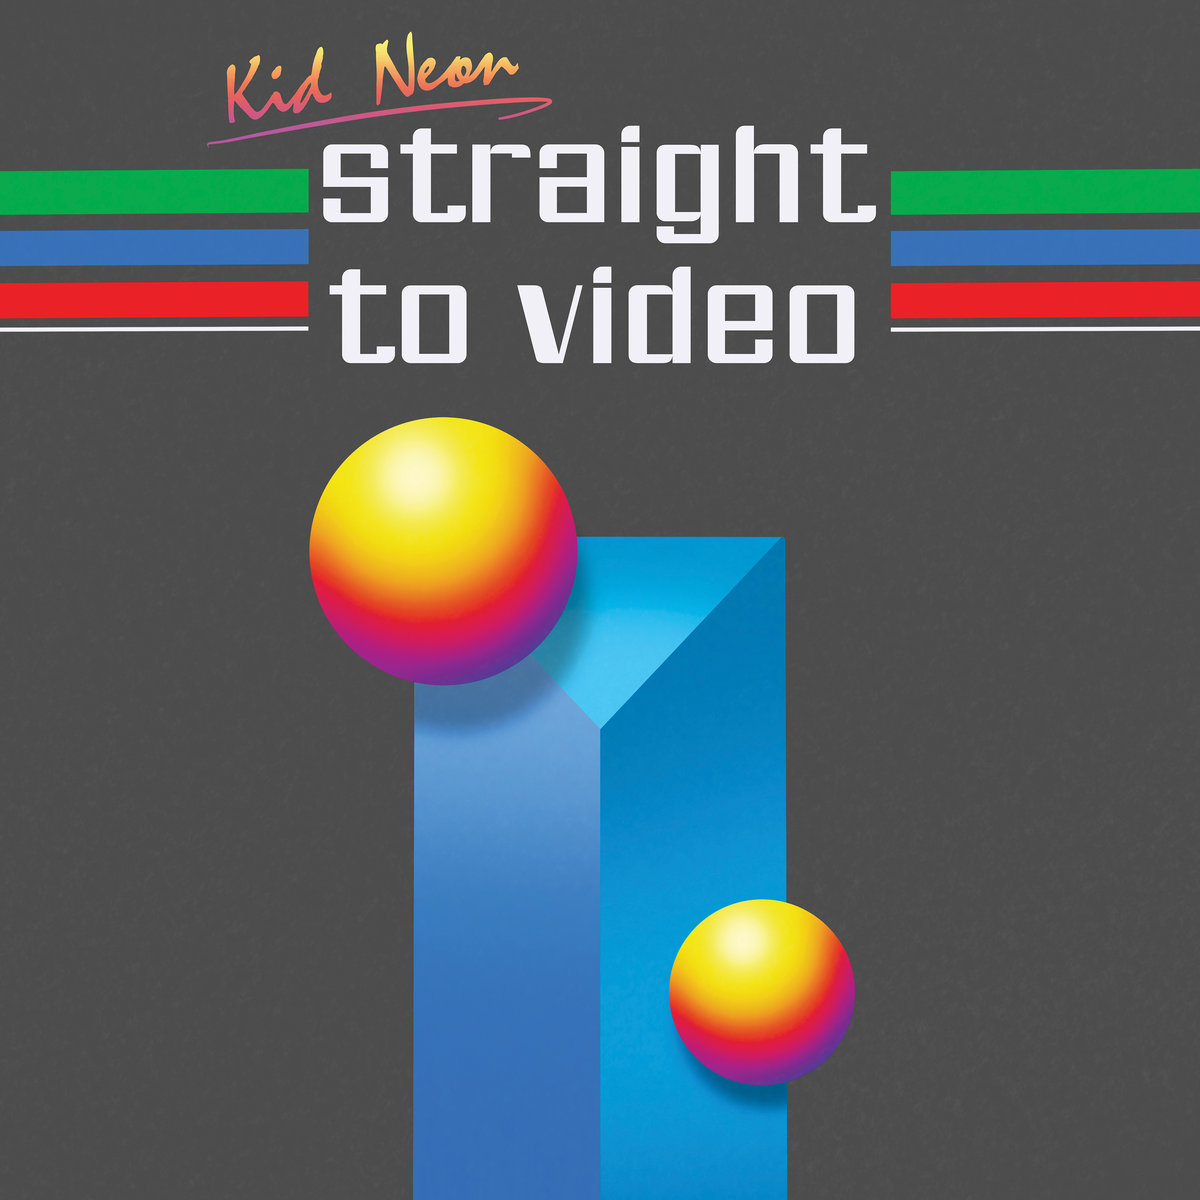 Kid Neon’s sophomore album has arrived, and it’s gone “Straight to Video”